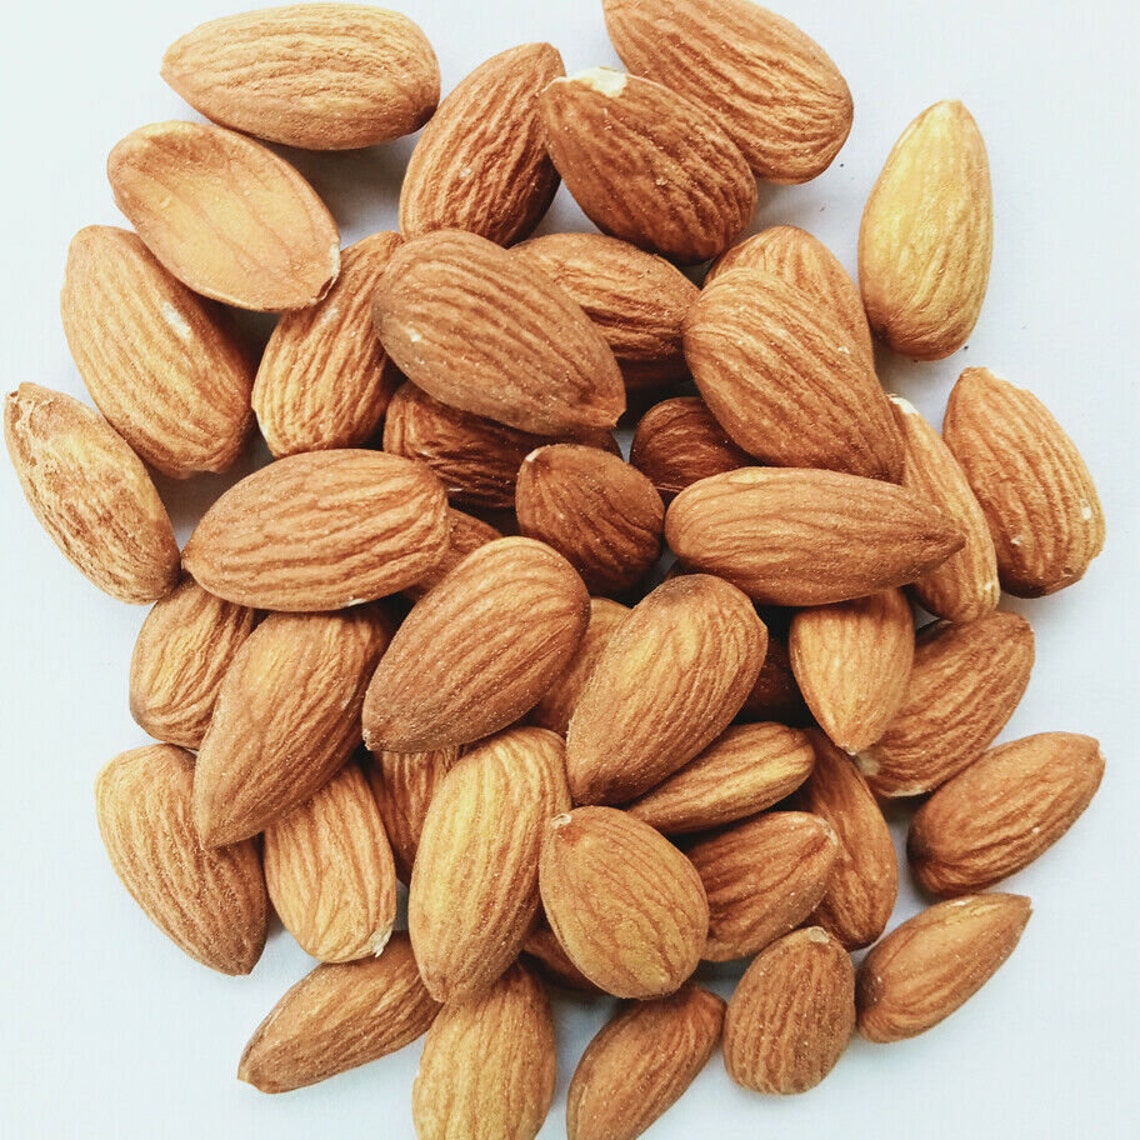 100 Organic Almonds Natural Whole Shelled Unsalted From Etsy Uk